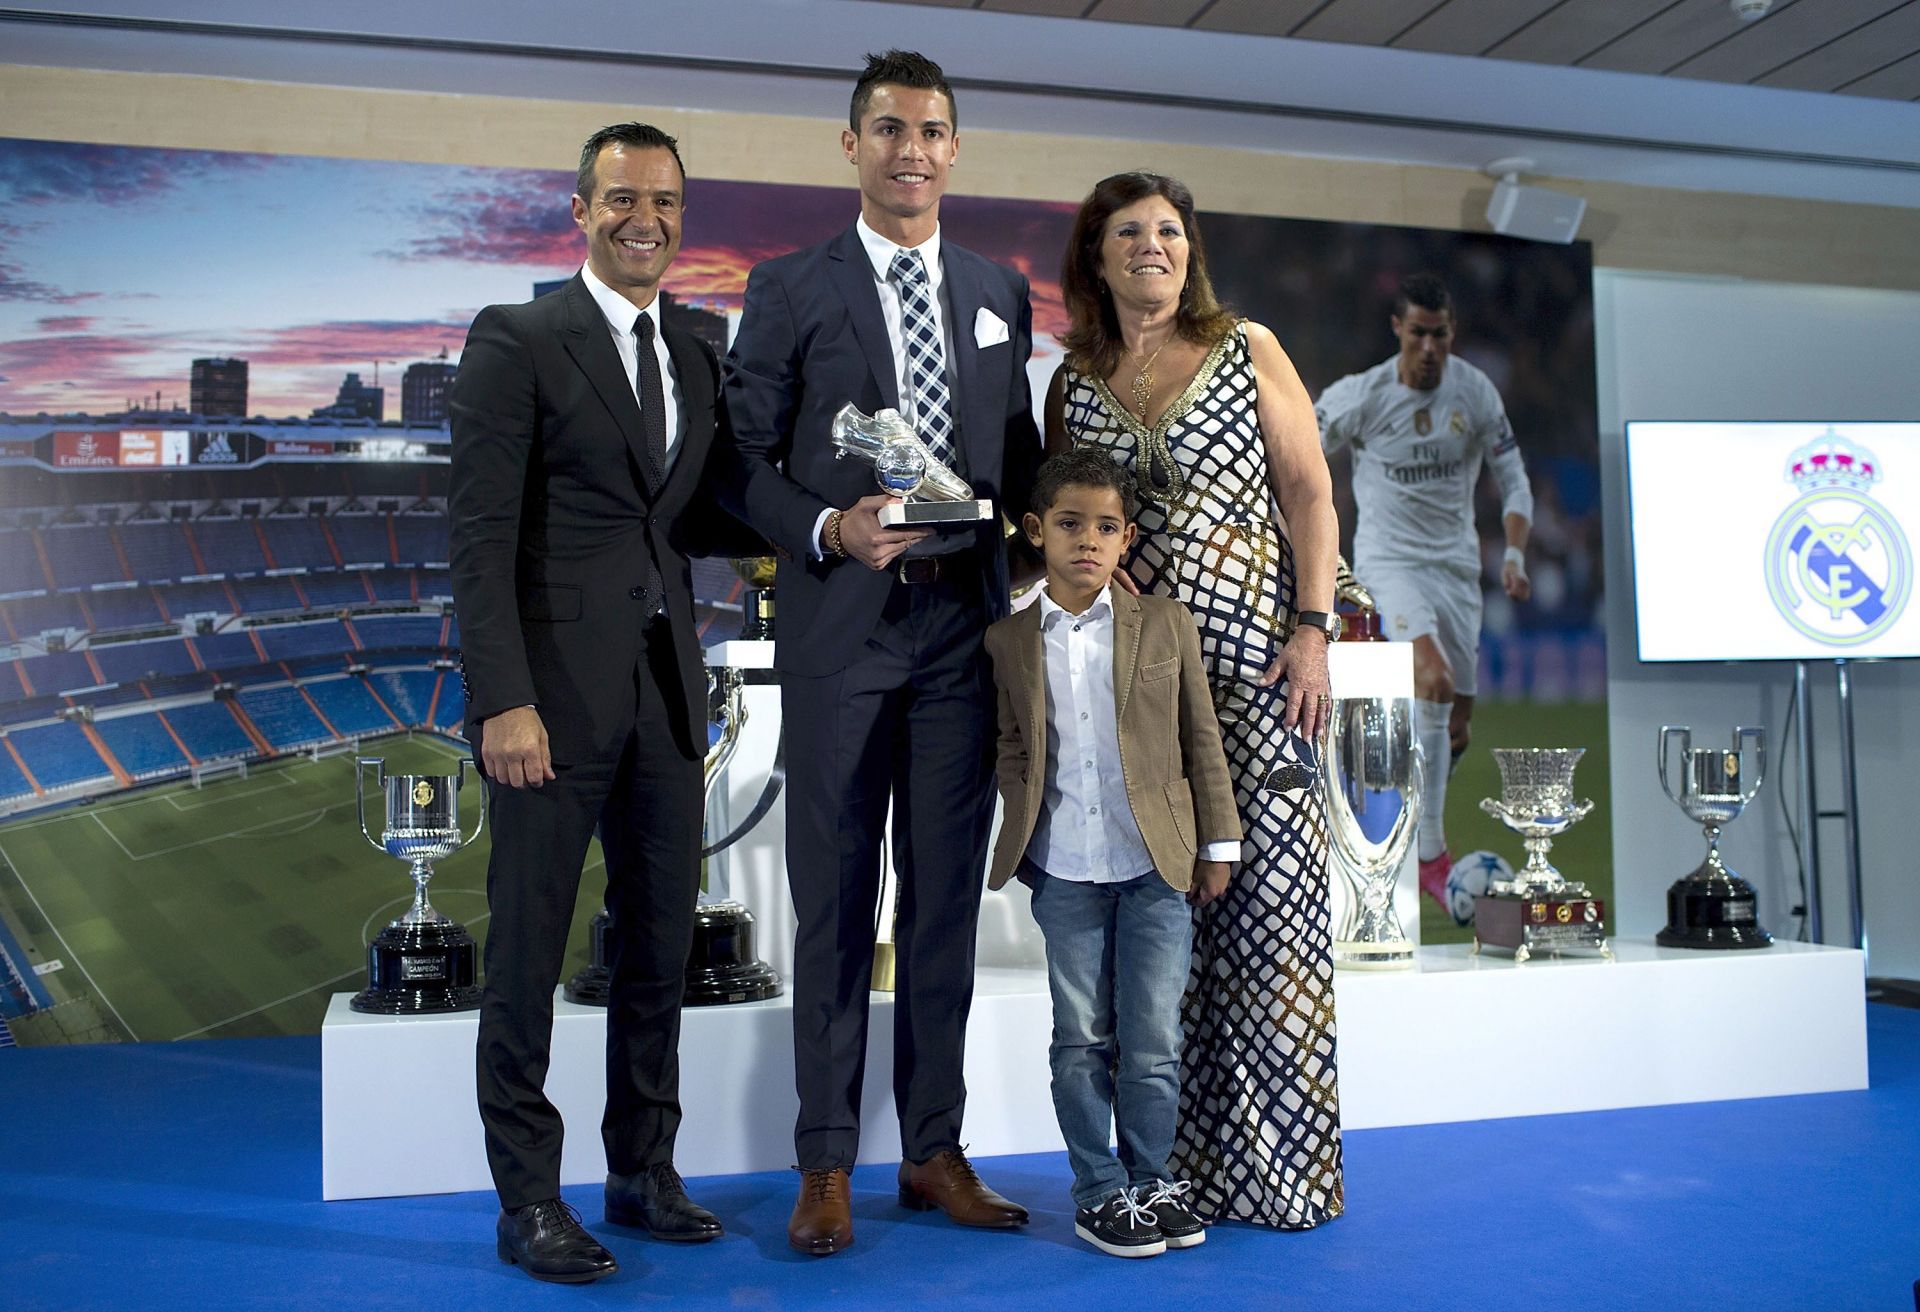 Cristiano Ronaldo with his mother, son, and former agent Mendes in this file photo